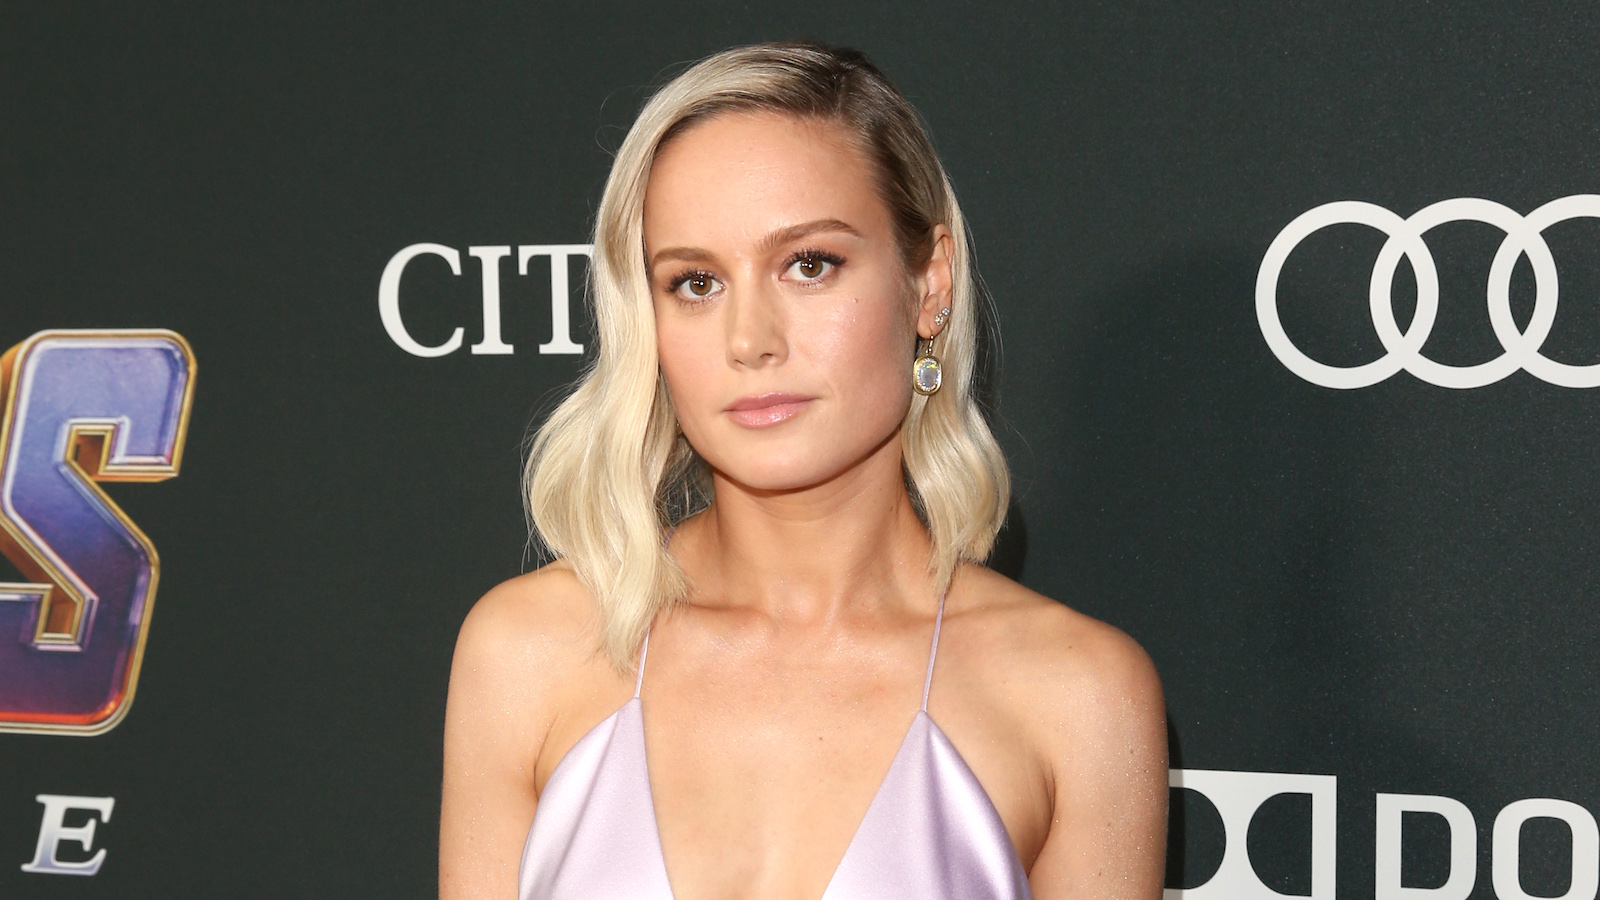 How old is Brie Larson?